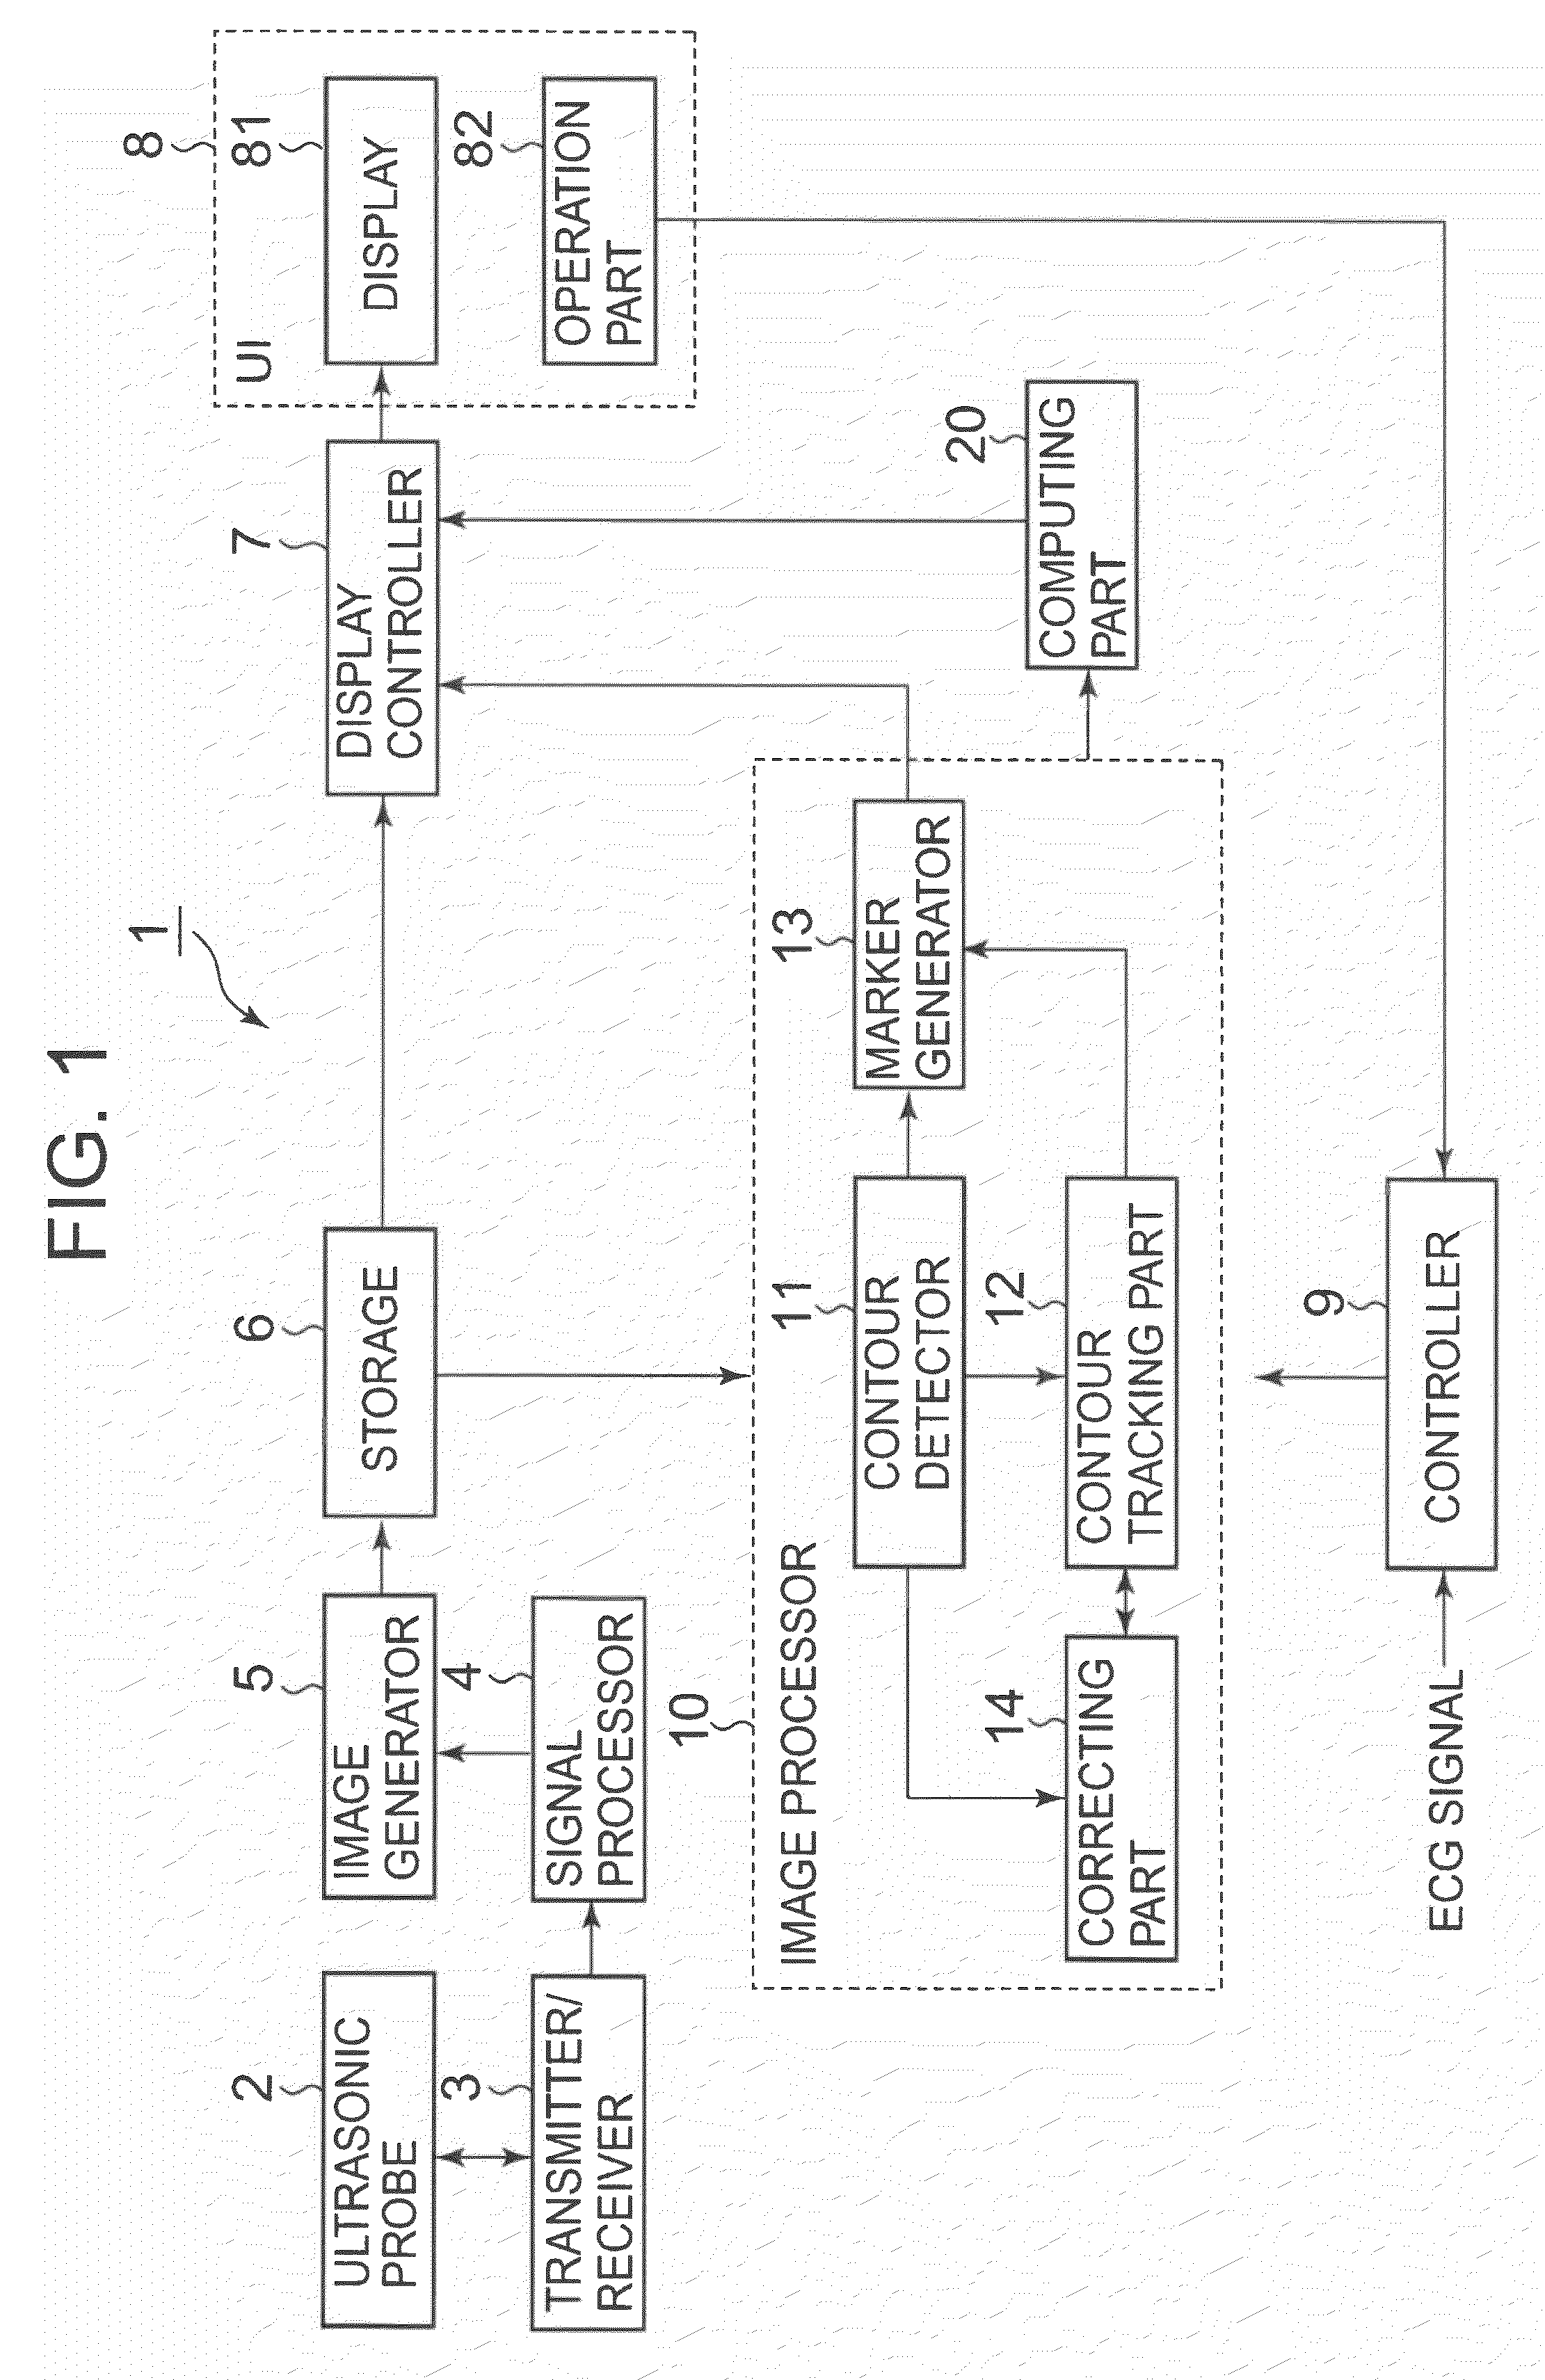 Ultrasonic image processing apparatus and method for processing ultrasonic image